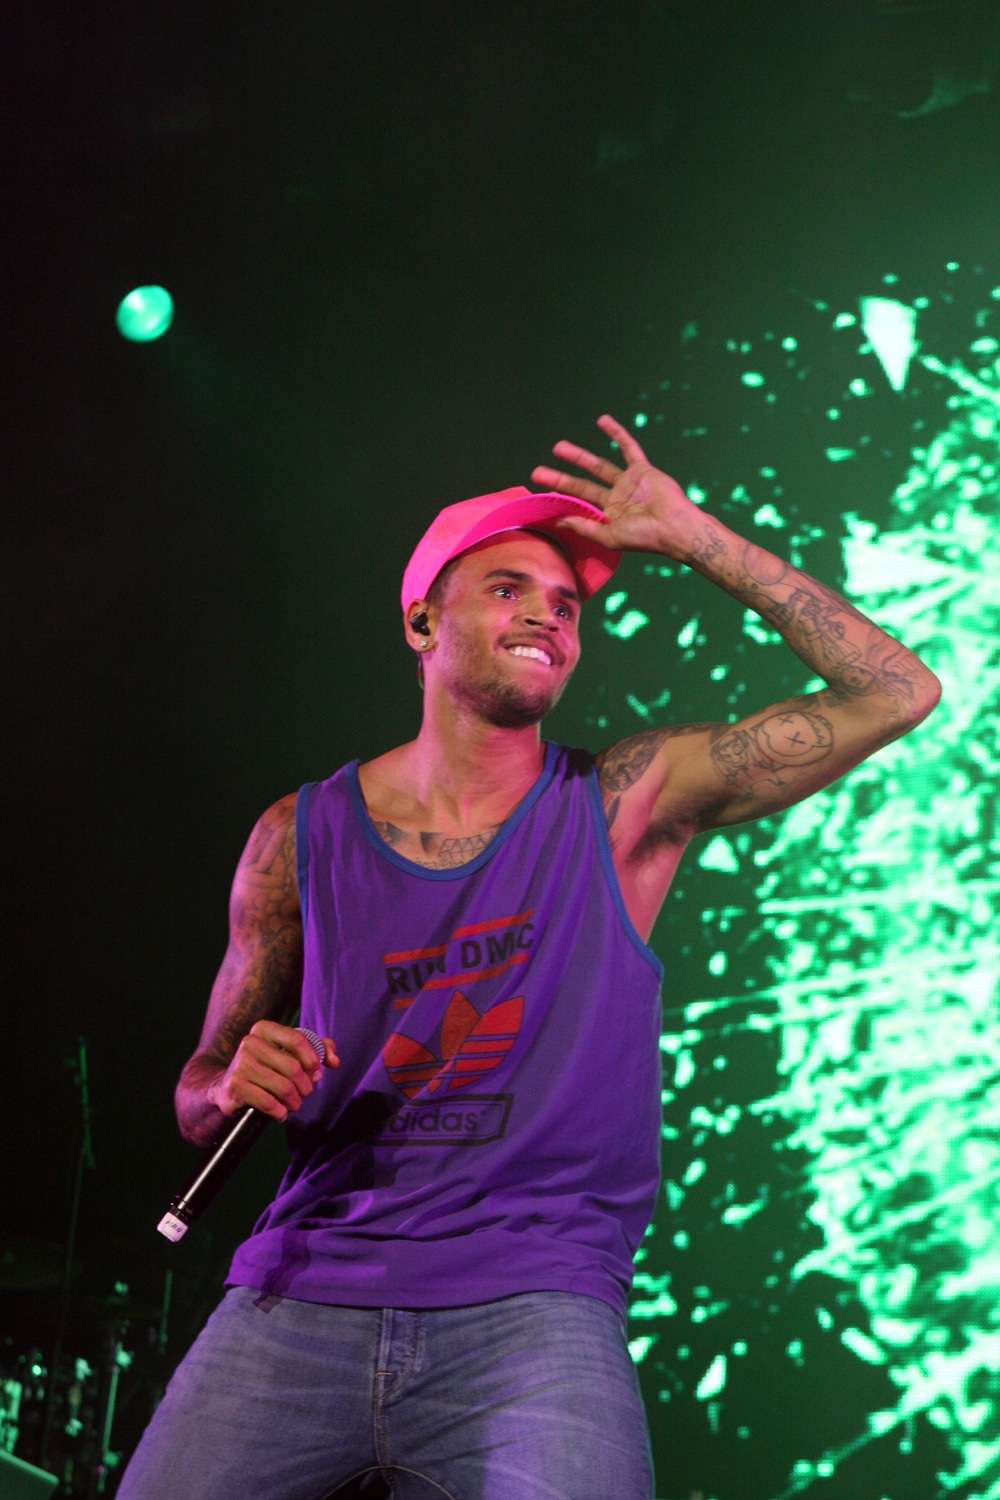 Chris Brown throws fan’s phone into the crowd for filming while on stage